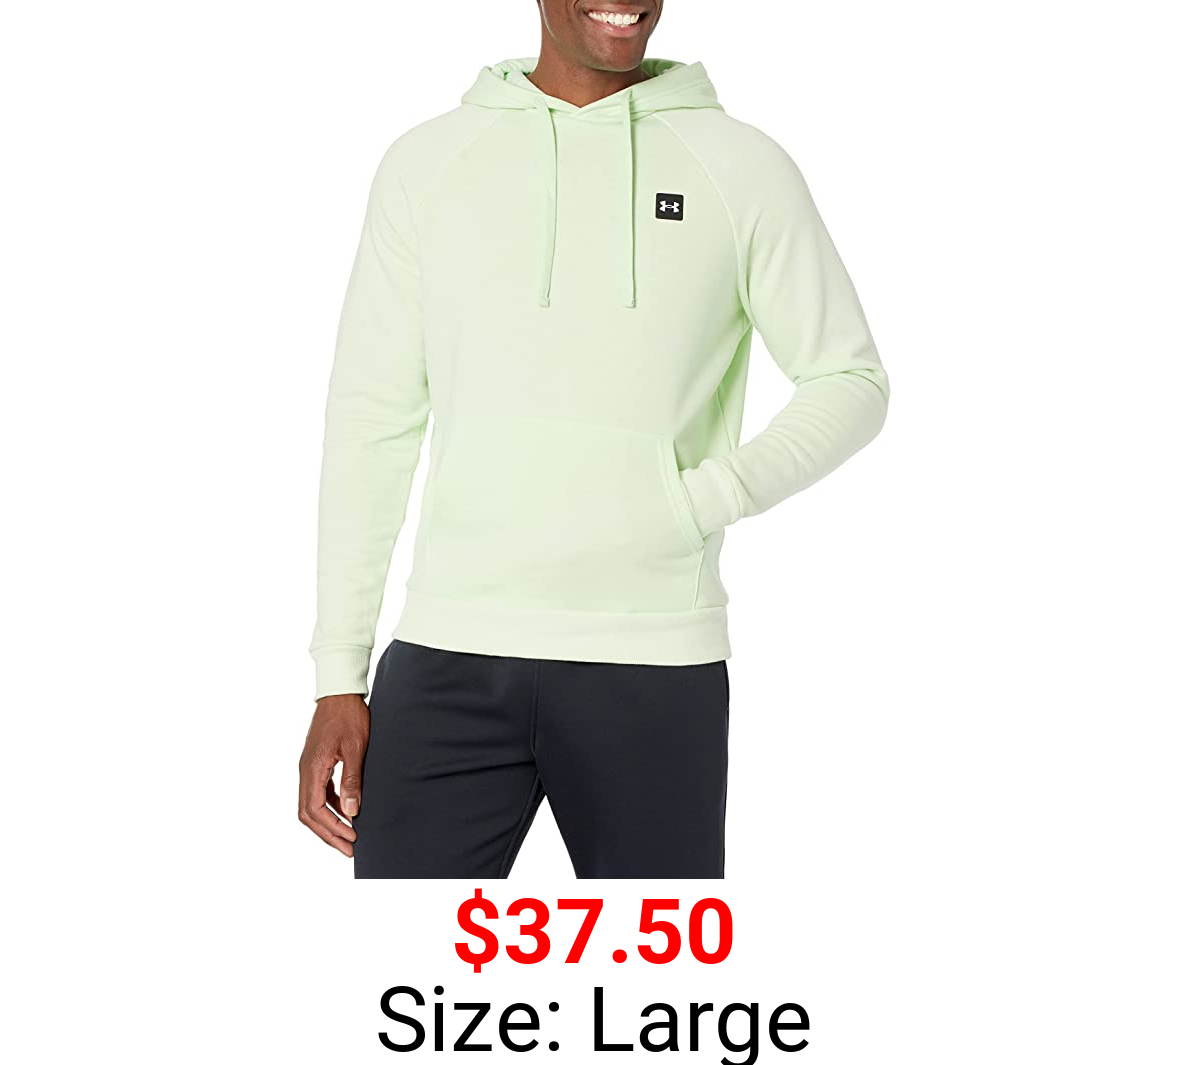 Under Armour Men’s Rival Fleece Fitted Hoodie